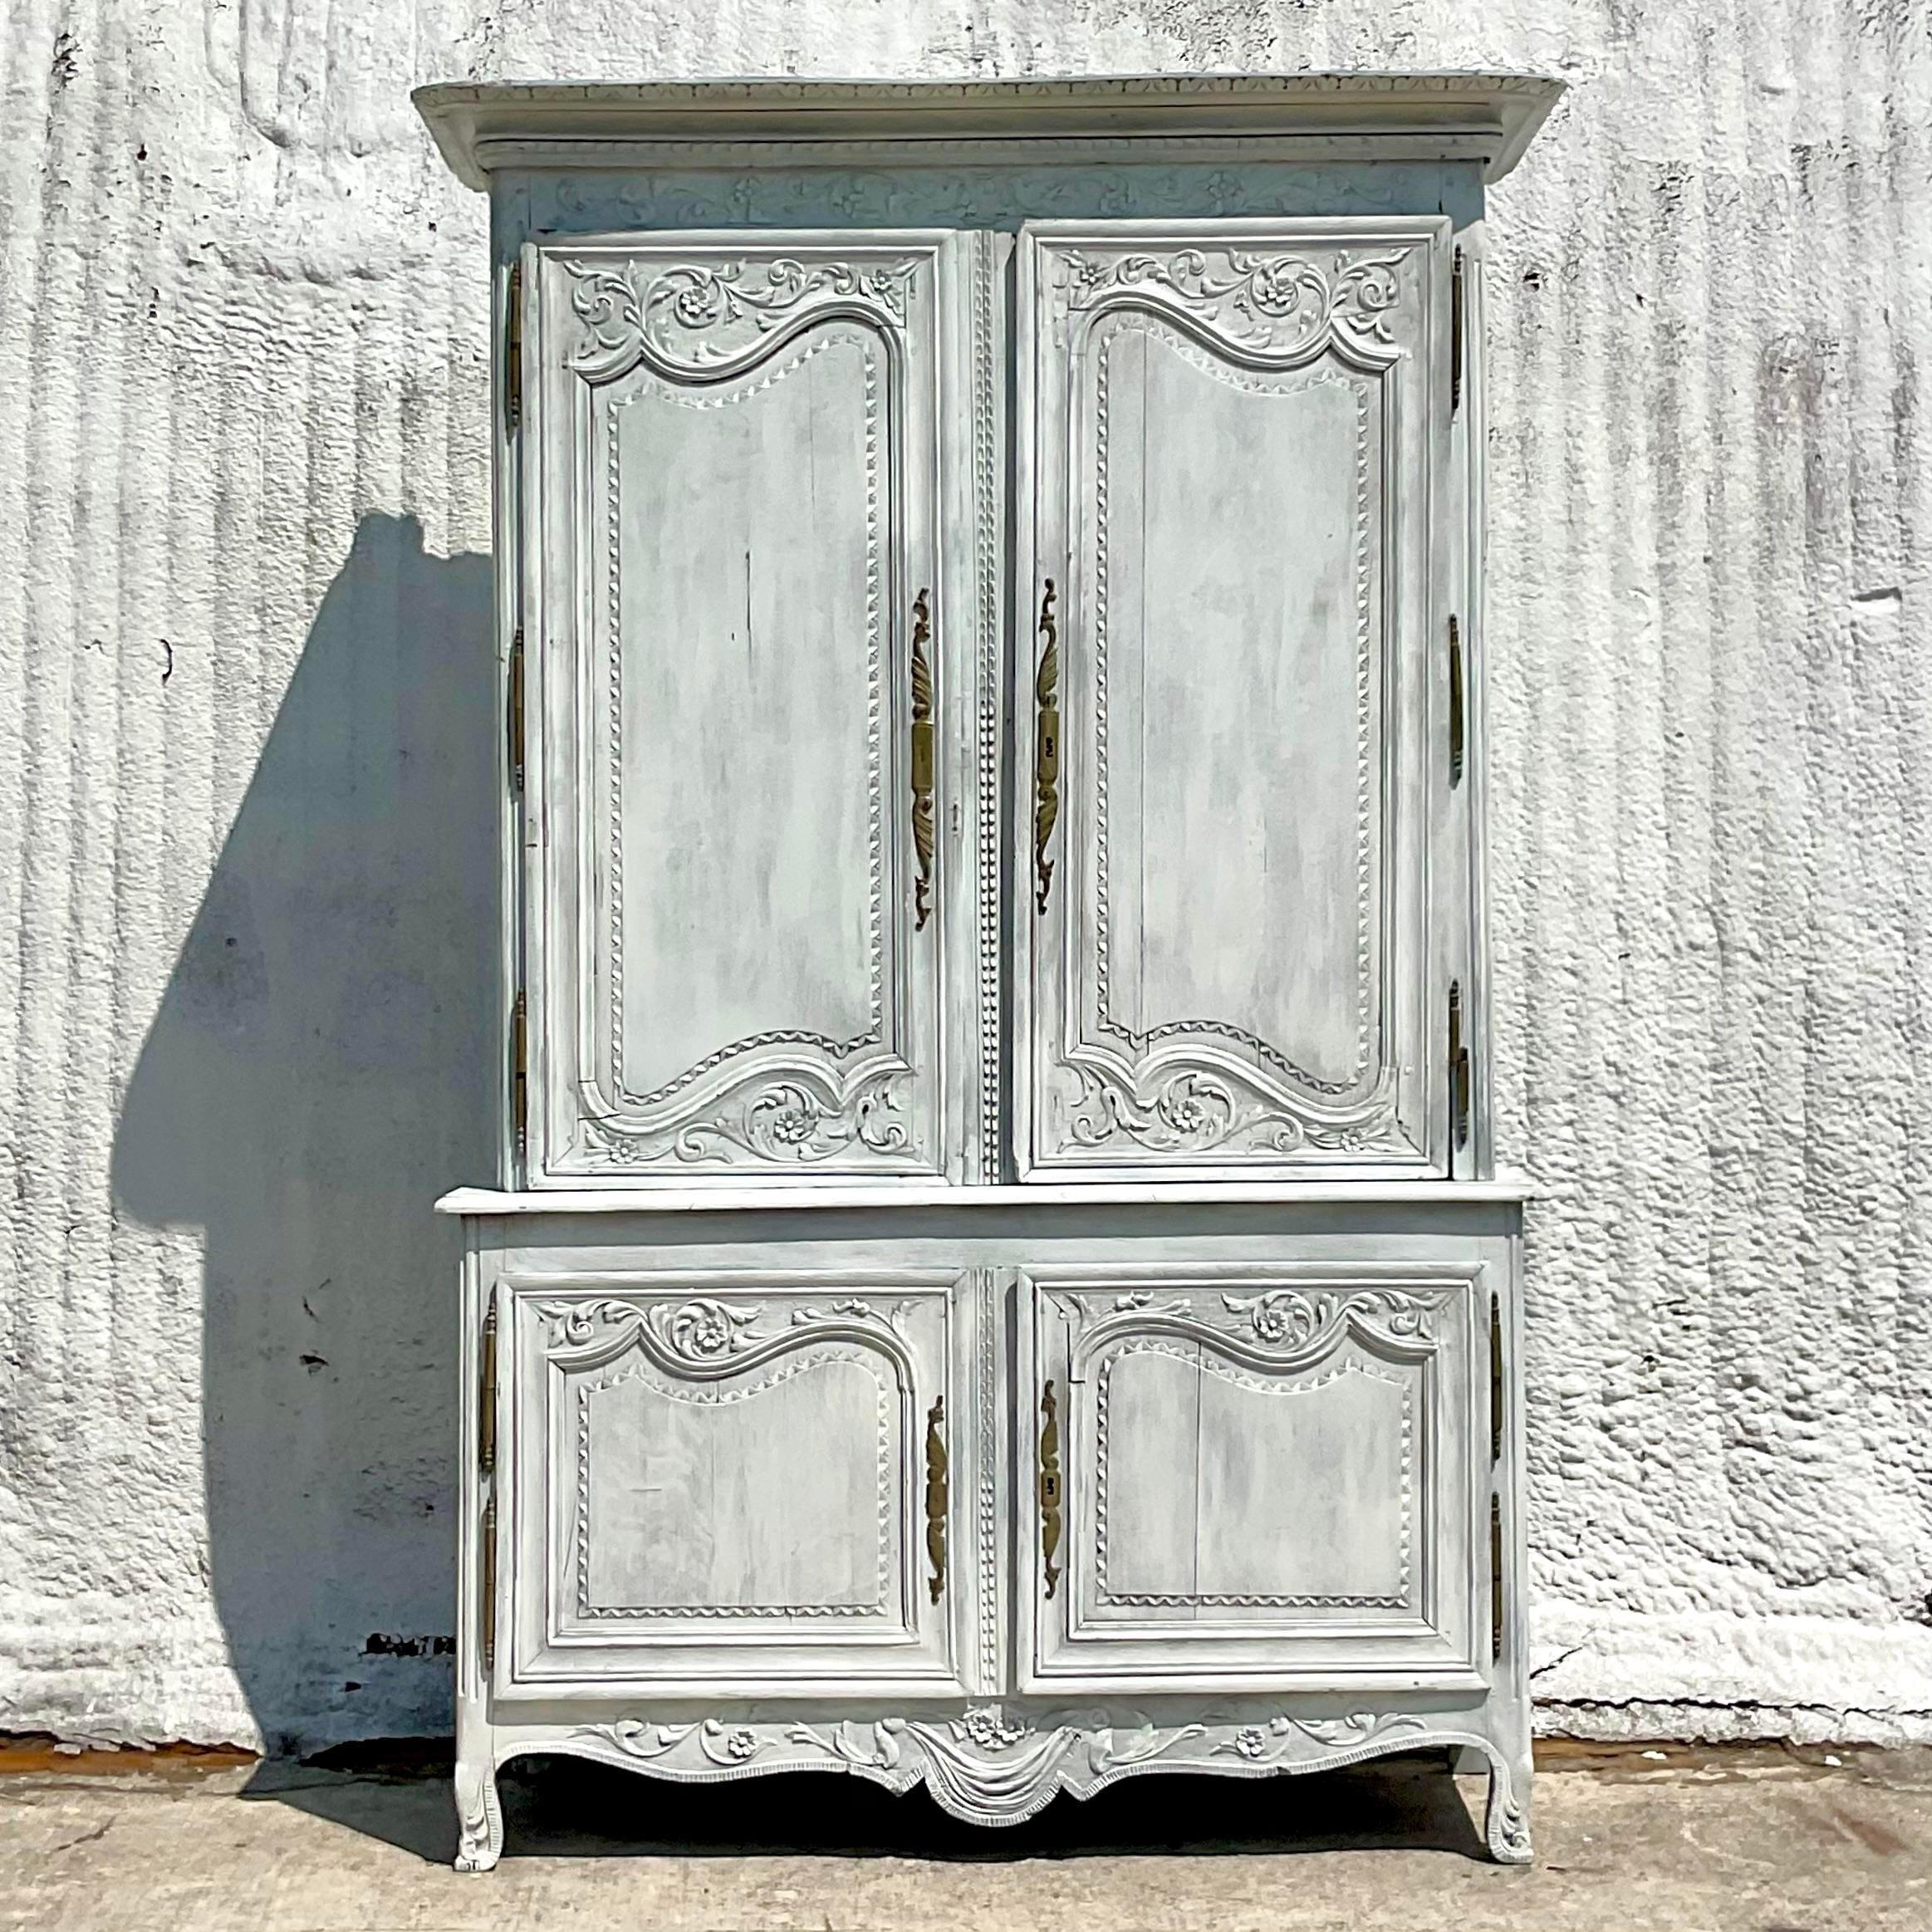 A spectacular vintage Boho storage cabinet. A stunning French cabinet with hand carved detail and a cerused finish. Lots of great storage space above and below. Acquired from a Palm Beach estate.